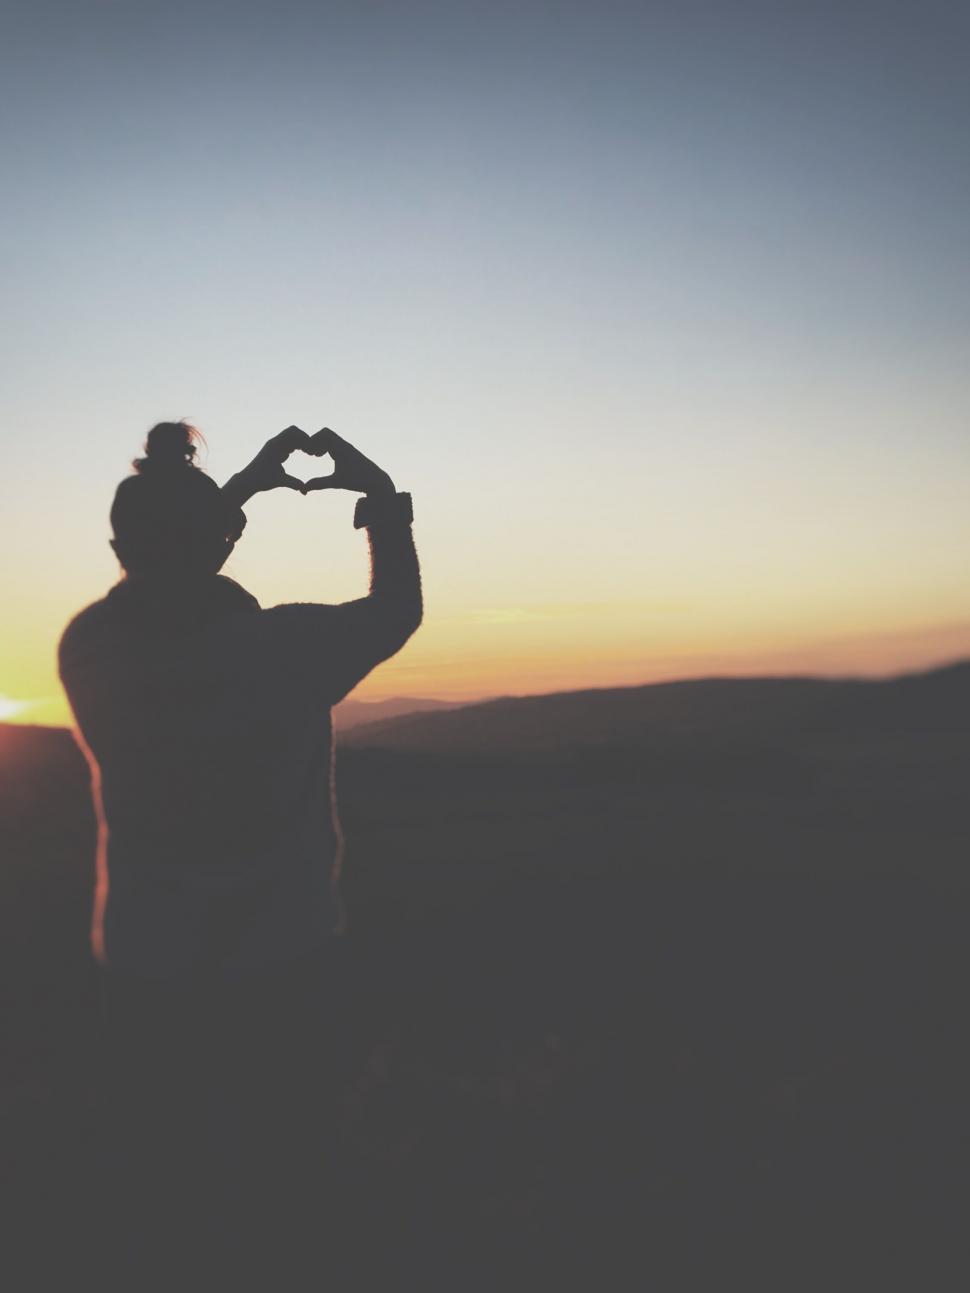 Free Image of Silhouette making heart shape with hands at sunset 